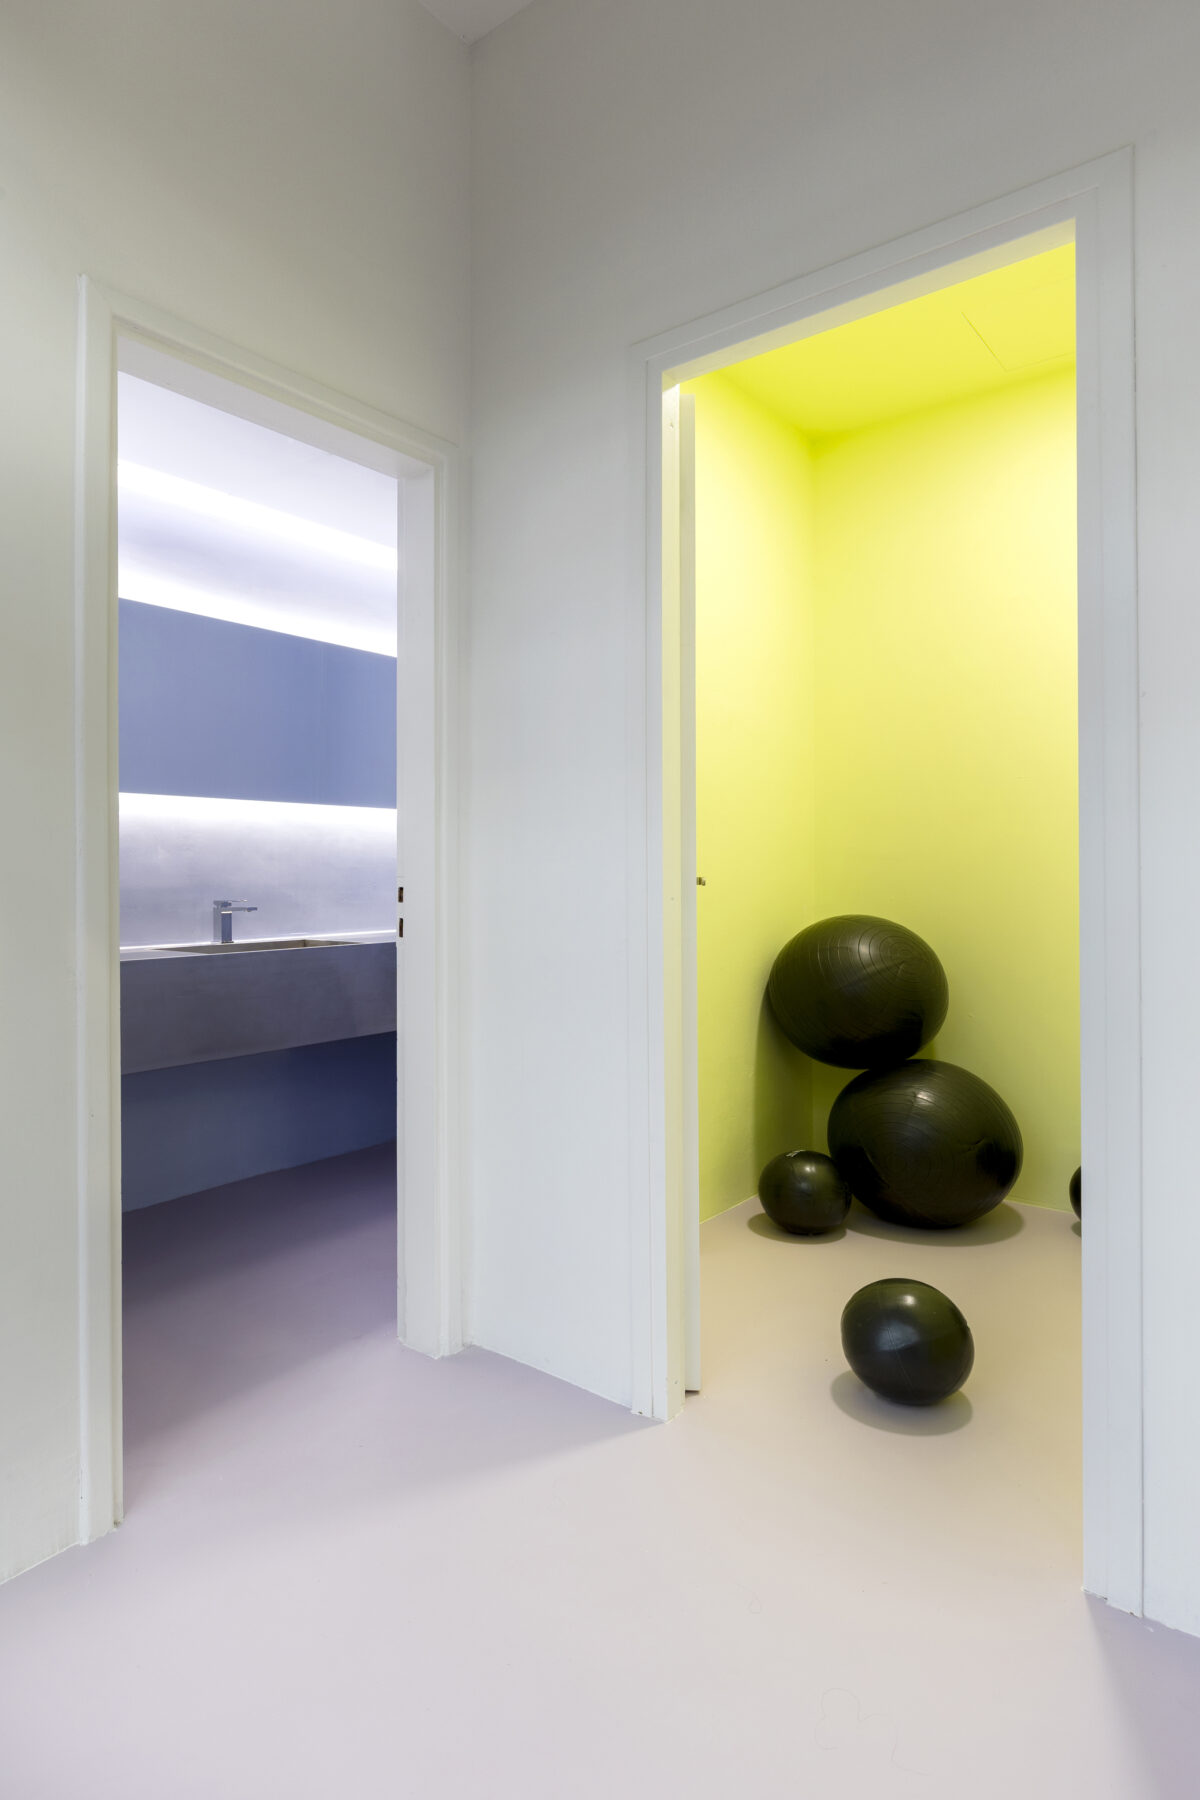 Archisearch A former office space transformed into a Pilates Studio by Theo Poulakos and Manos Botsaris